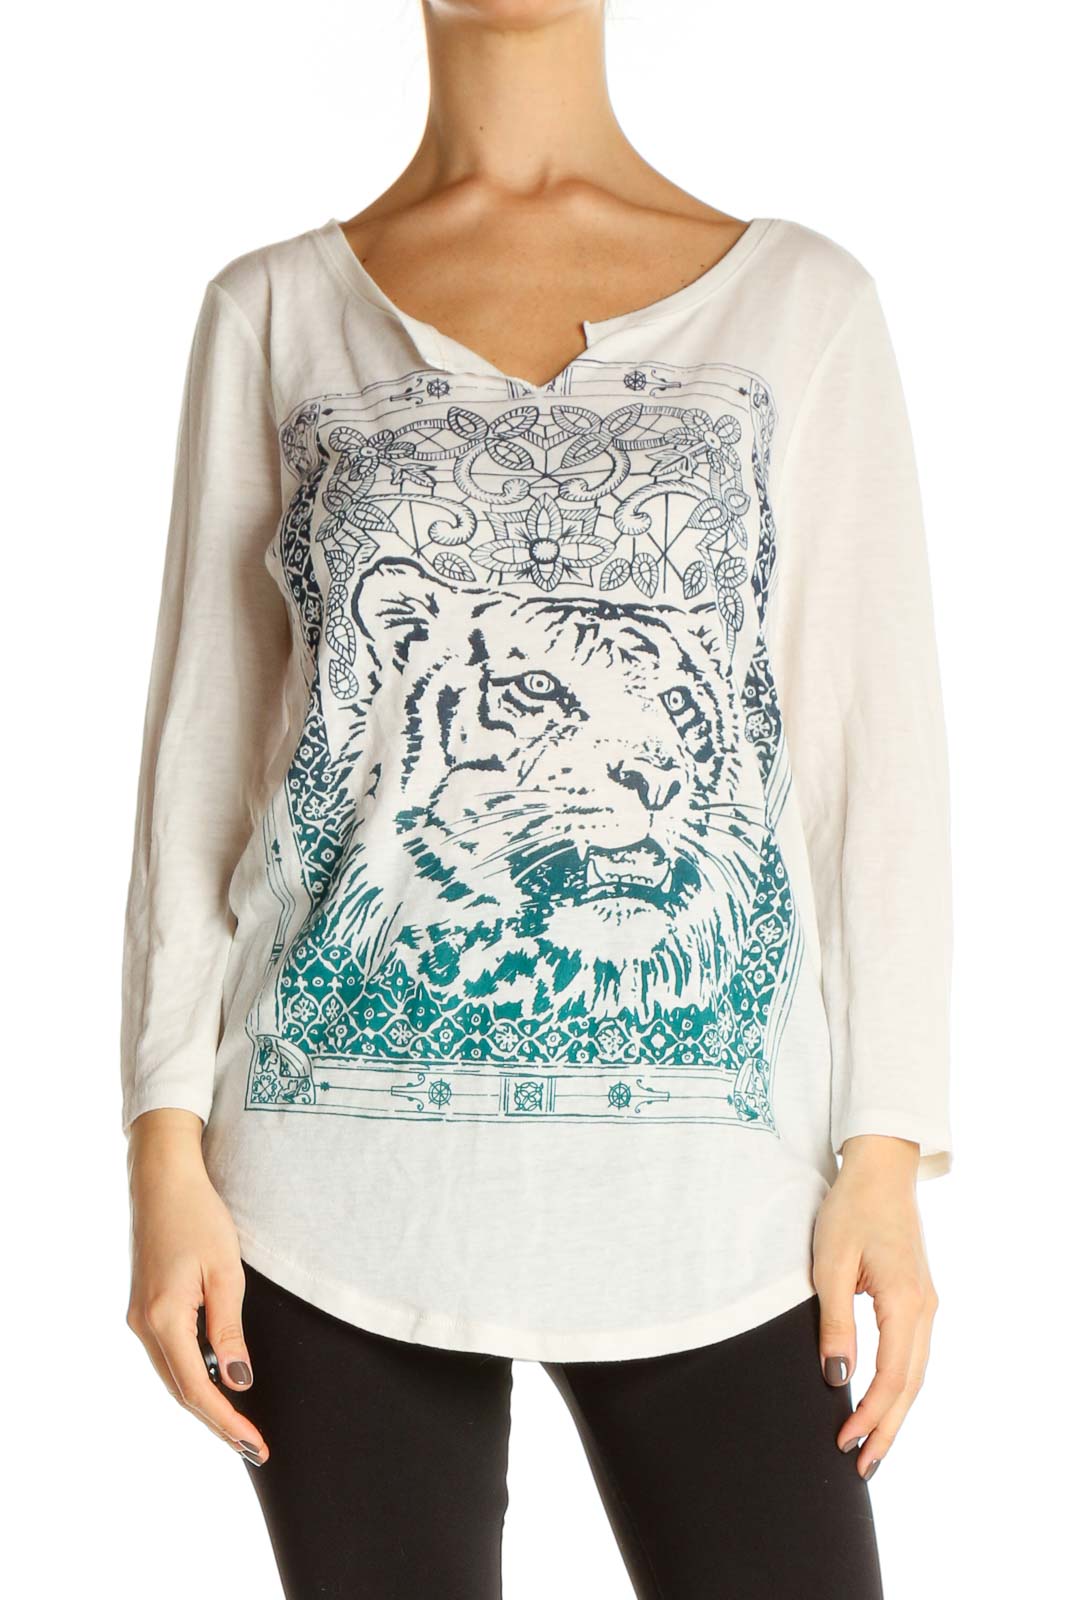 White Graphic Print Casual Blouse Front